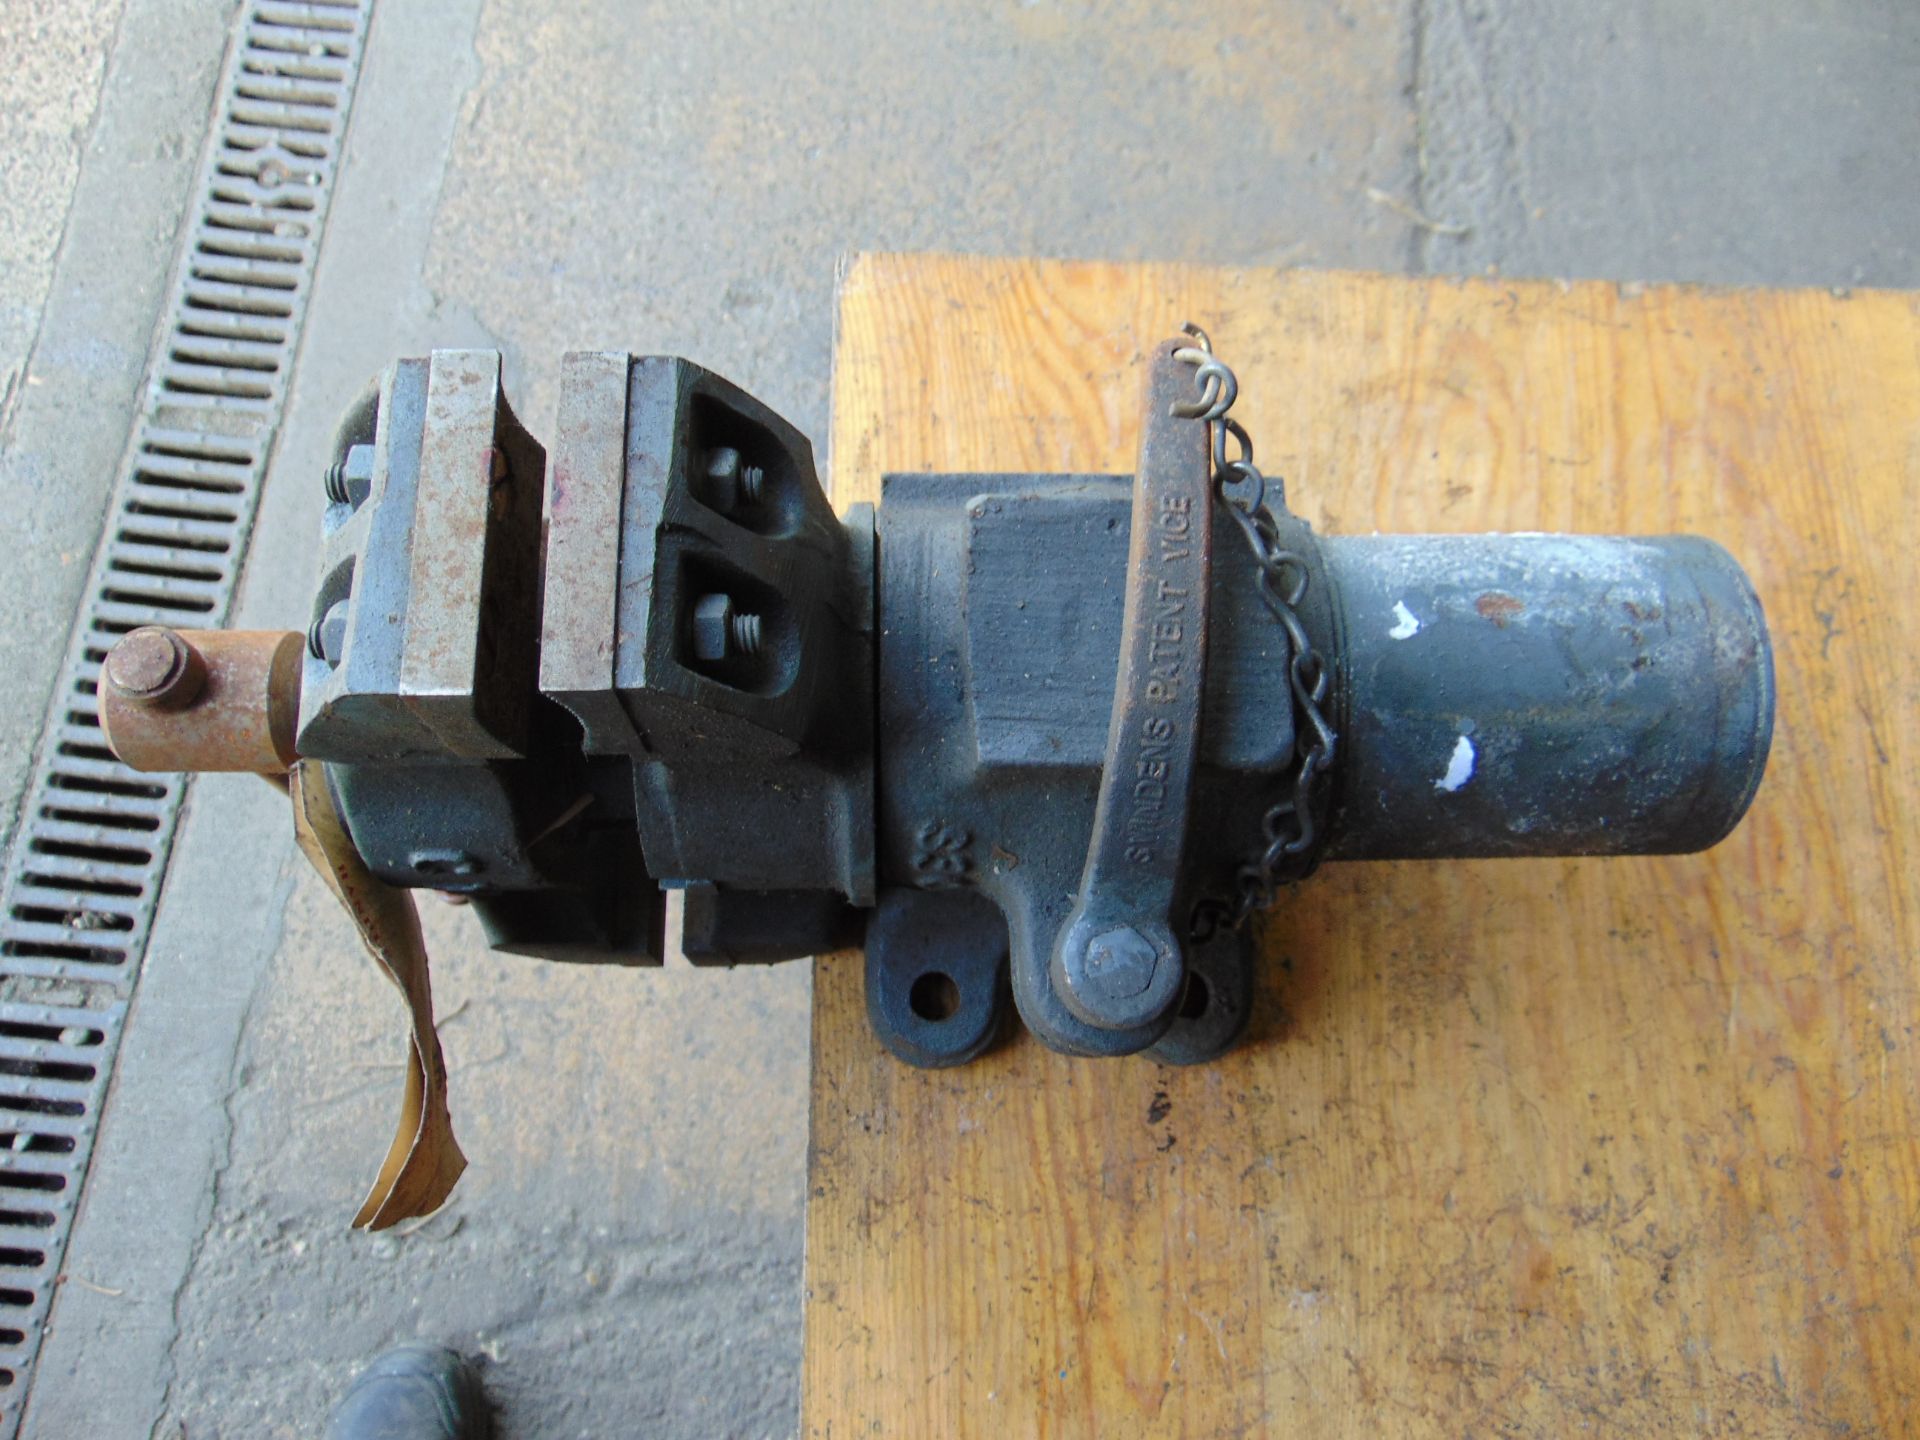 Swindens Patent Double Jaw Revolving Bench Vice - Image 10 of 18